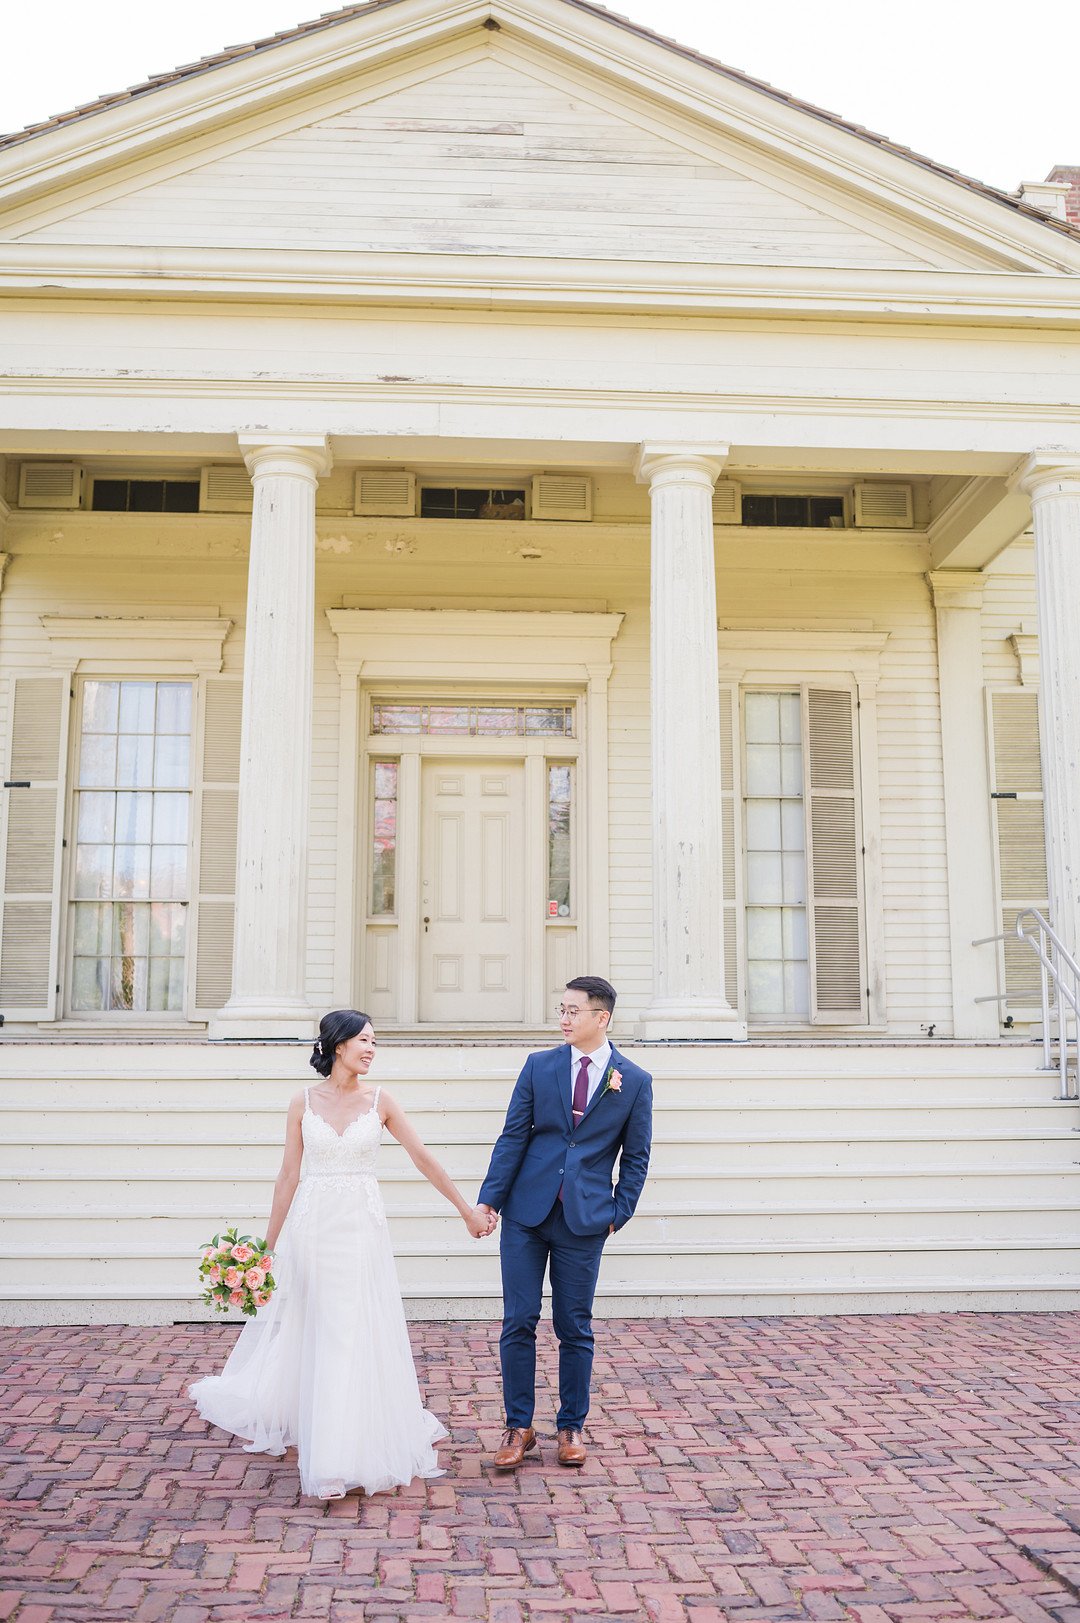 Chan_Chan_Winterlyn Photography_GLESSNER HOUSE CHICAGO WEDDING-79_low.jpg